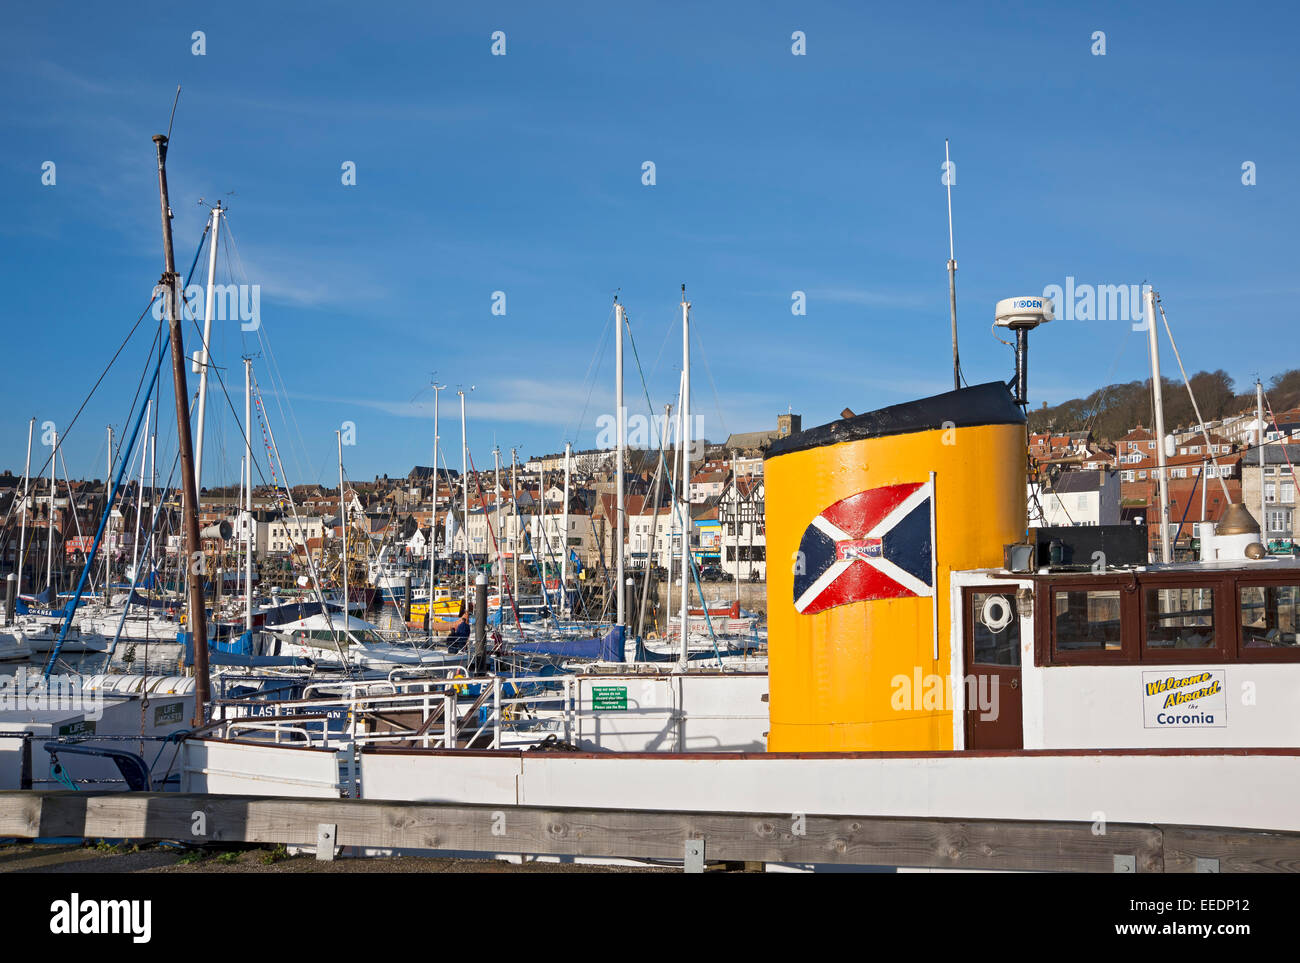 Boats boat moored in the harbour in winter Scarborough North Yorkshire England UK United Kingdom GB Great Britain Stock Photo